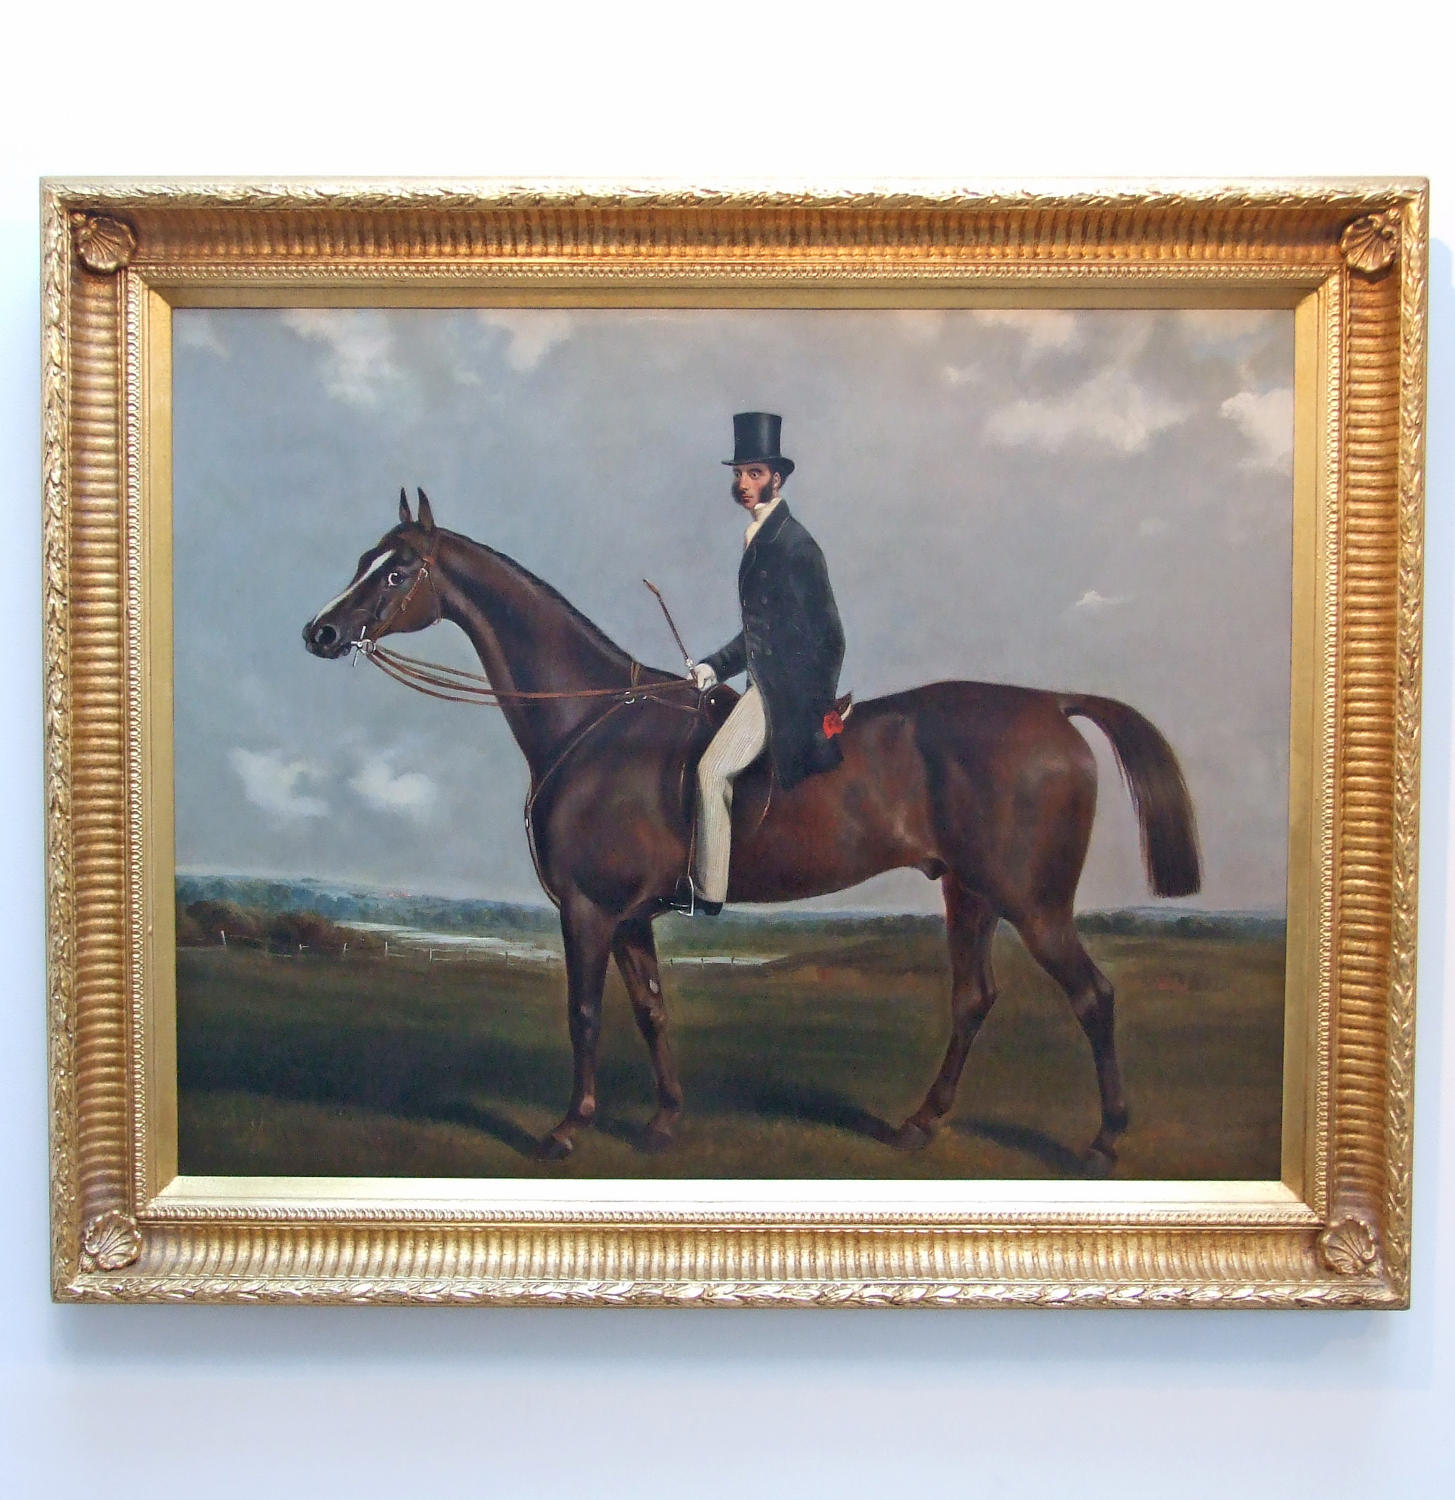 Oil portrait of horse and rider